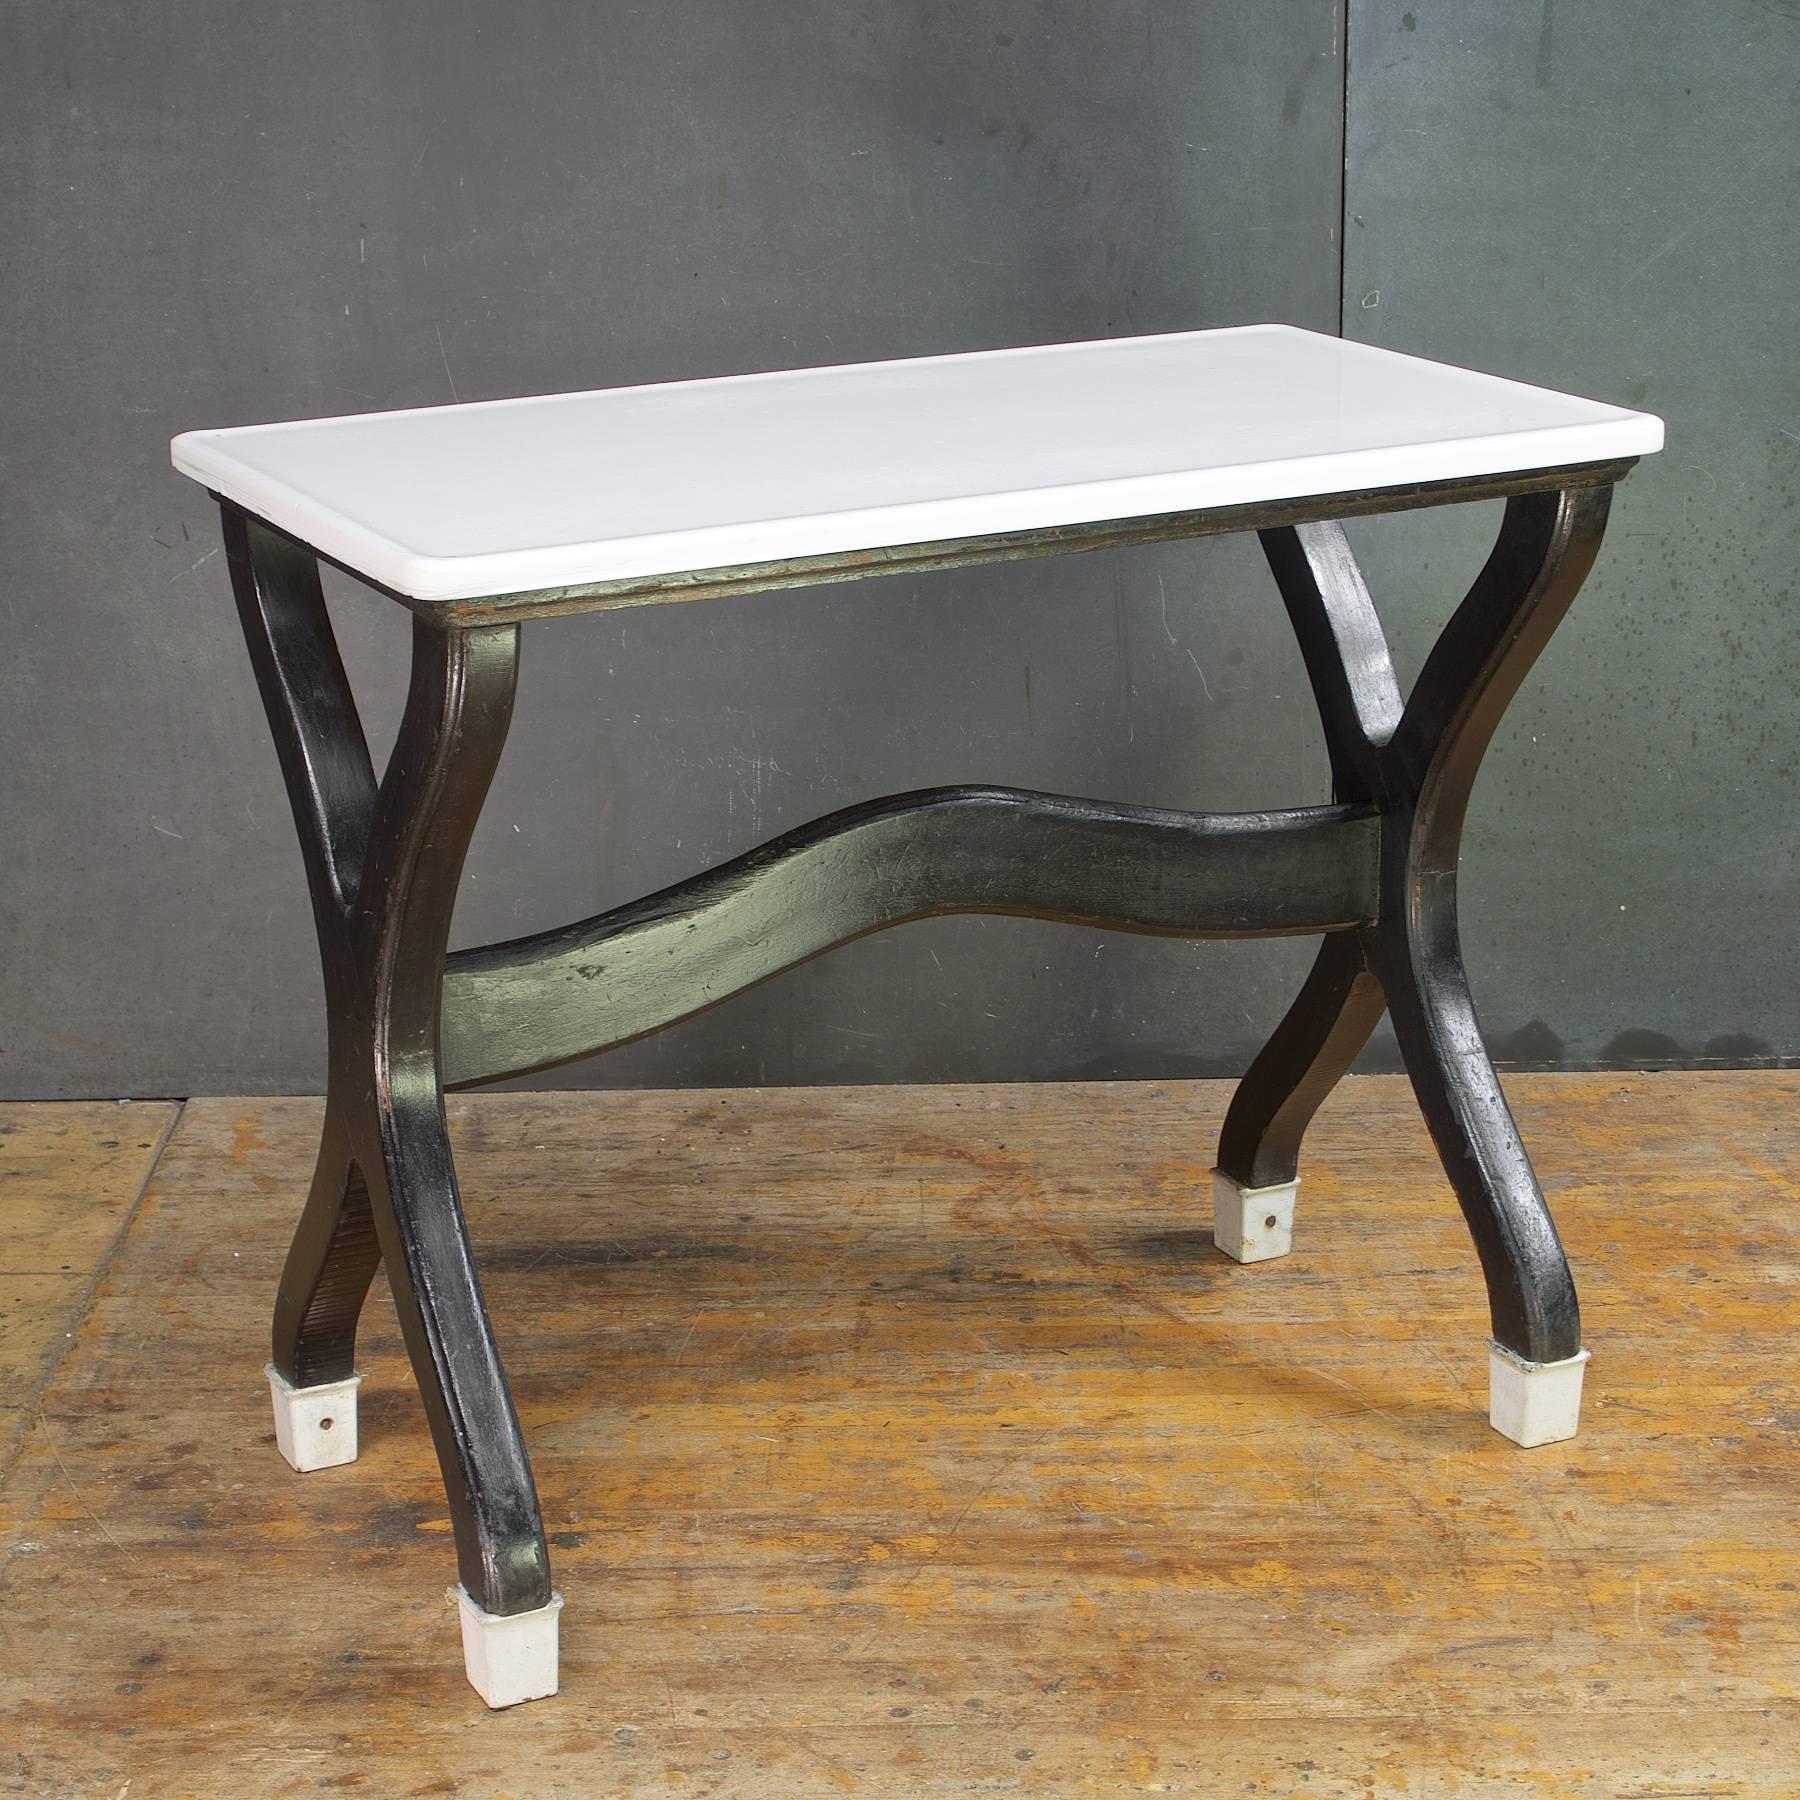 Beautiful opaque white surface. A historical and obsolete Industrial cooking relic with the original vitrolite (milk glass slab top).  Perhaps used as a Bakers' prepping desk worktable. H 30.38 in. x W 35.75 in. x D 20 in.
